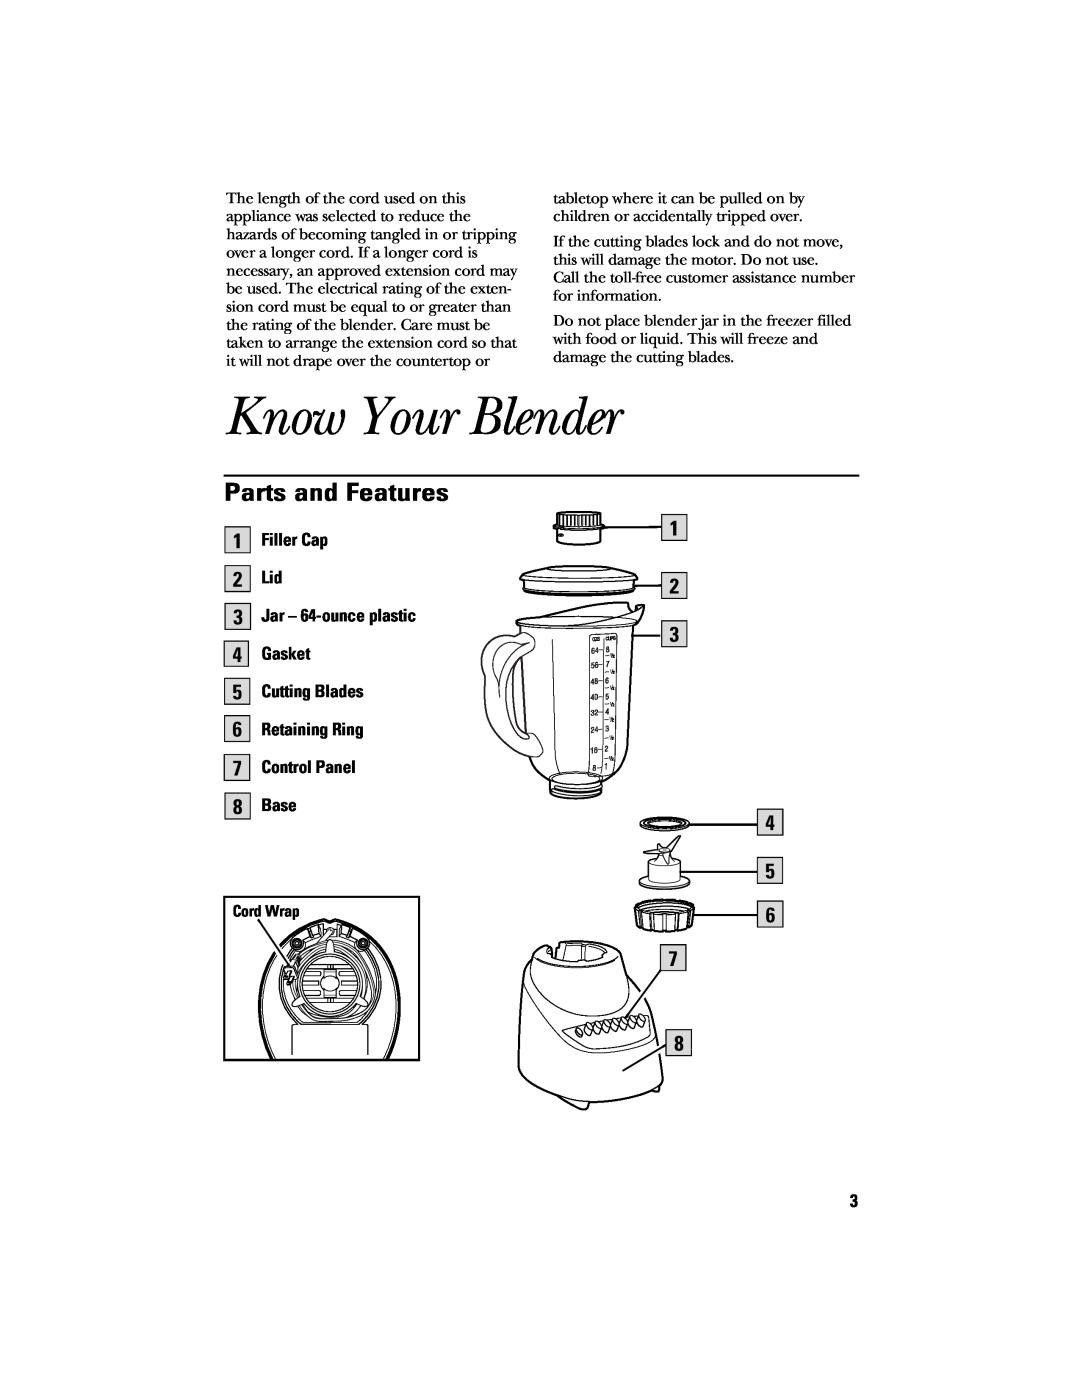 GE 840078900 manual Know Your Blender, Parts and Features, Filler Cap, Jar - 64-ounce plastic, Gasket, Cutting Blades, Base 